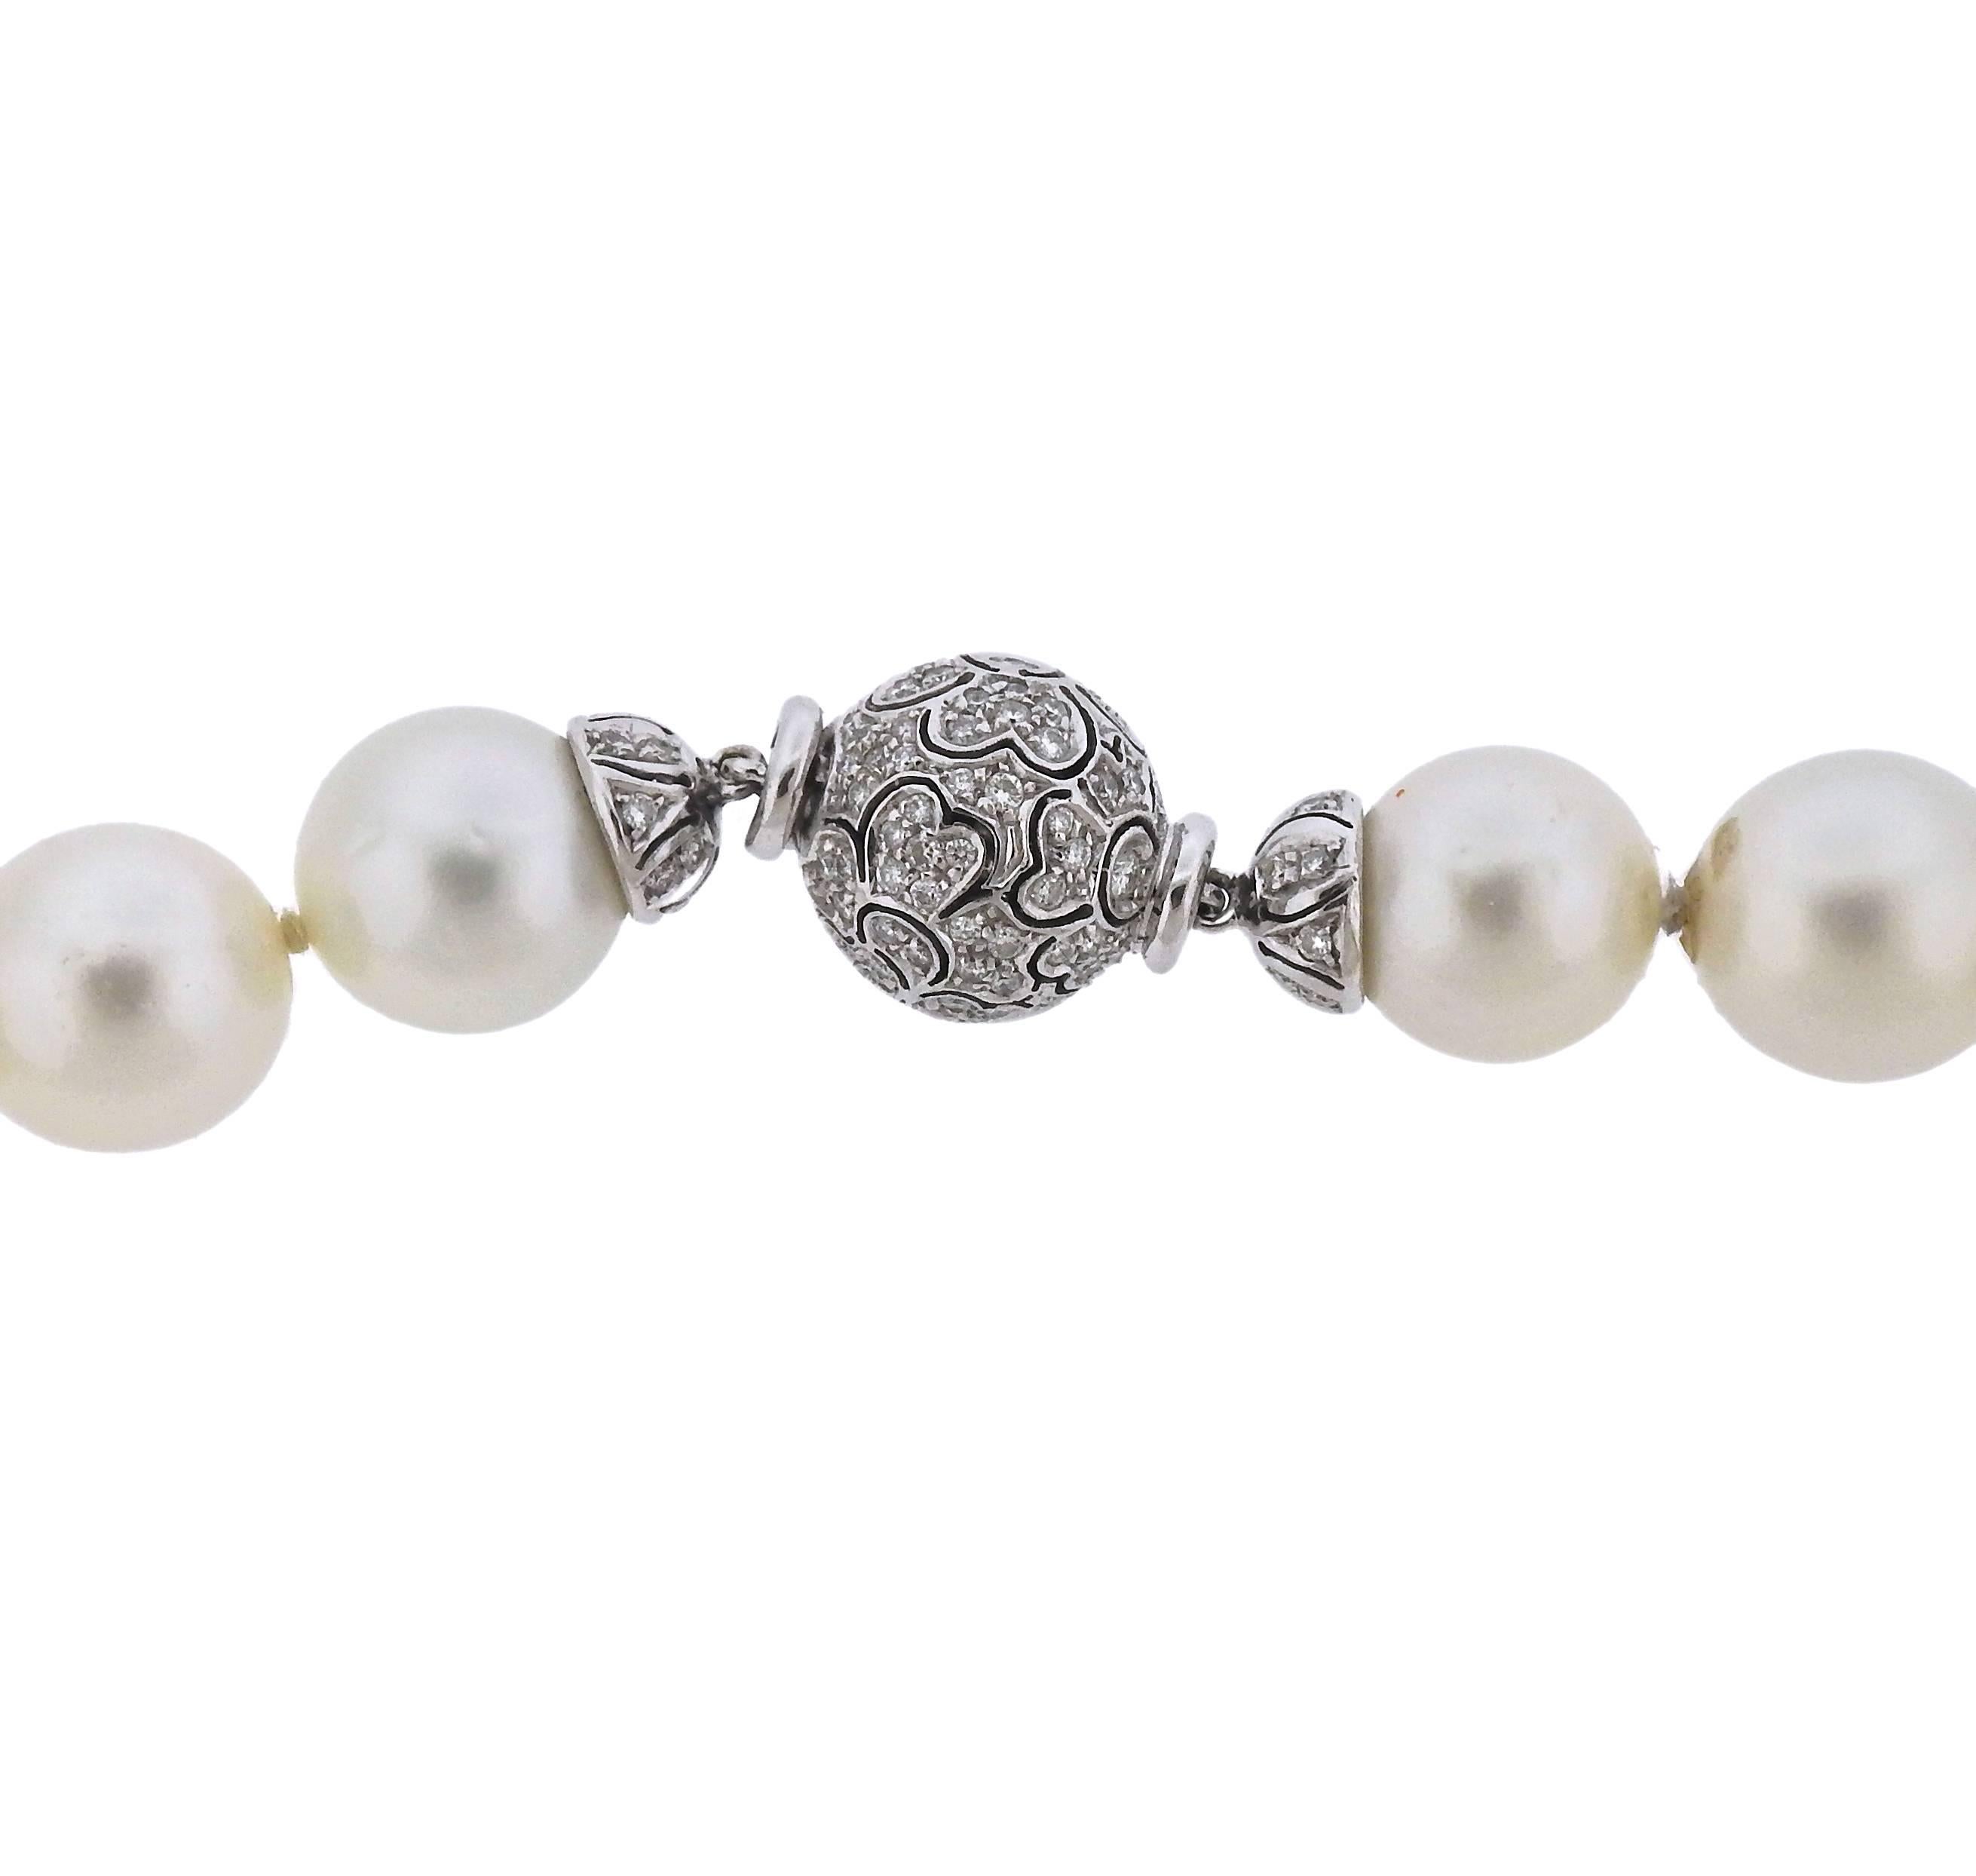 18k white gold necklace, decorated with approximately 0.60ctw in diamonds, featuring graduated South Sea pearls, measuring from 12.5mm to 16.8mm. Necklace is 21 inches long. Marked 750 and Italian mark. Weight of the necklace - 145.2 grams.